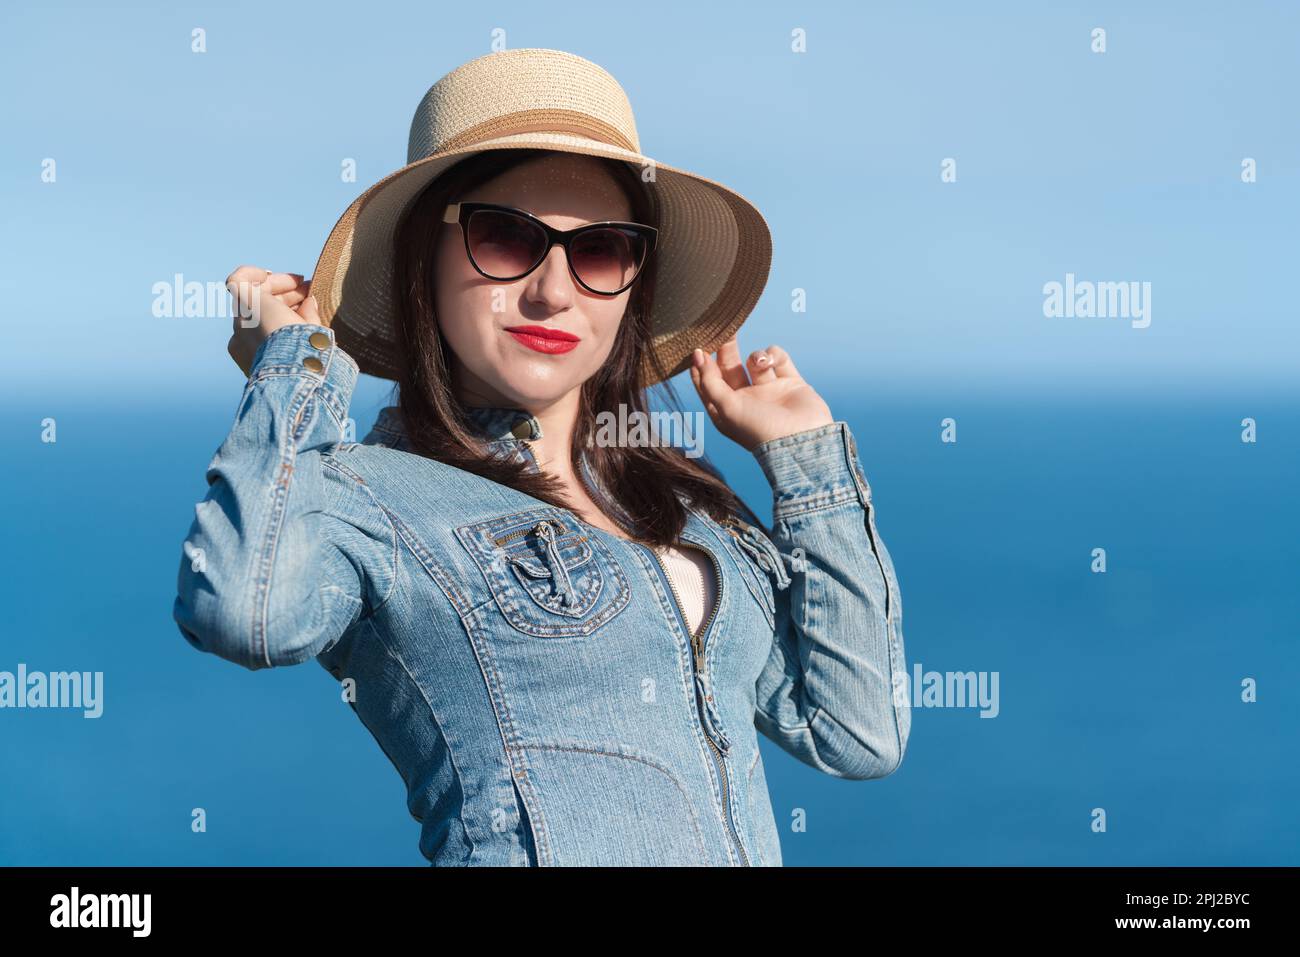 Caucasian ethnicity woman in sunglasses raised her hands and holding straw hat on her head. 40 year old hipster woman in denim jacket standing Stock Photo